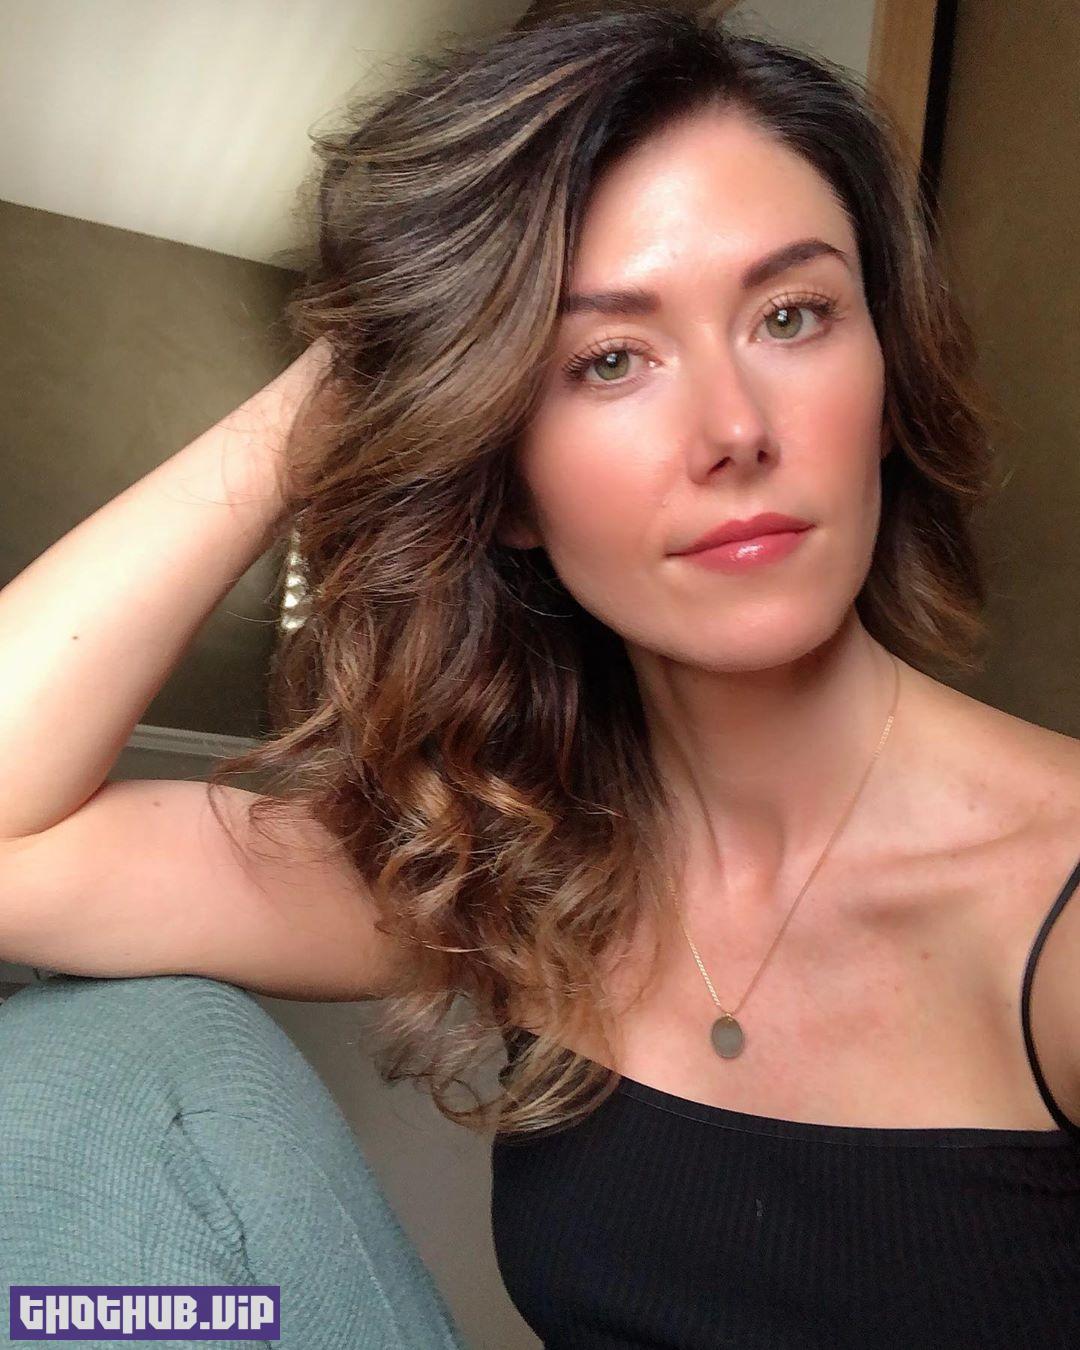 1696108111 249 Jewel Staite Nude And Sexy 59 Photos and Videos